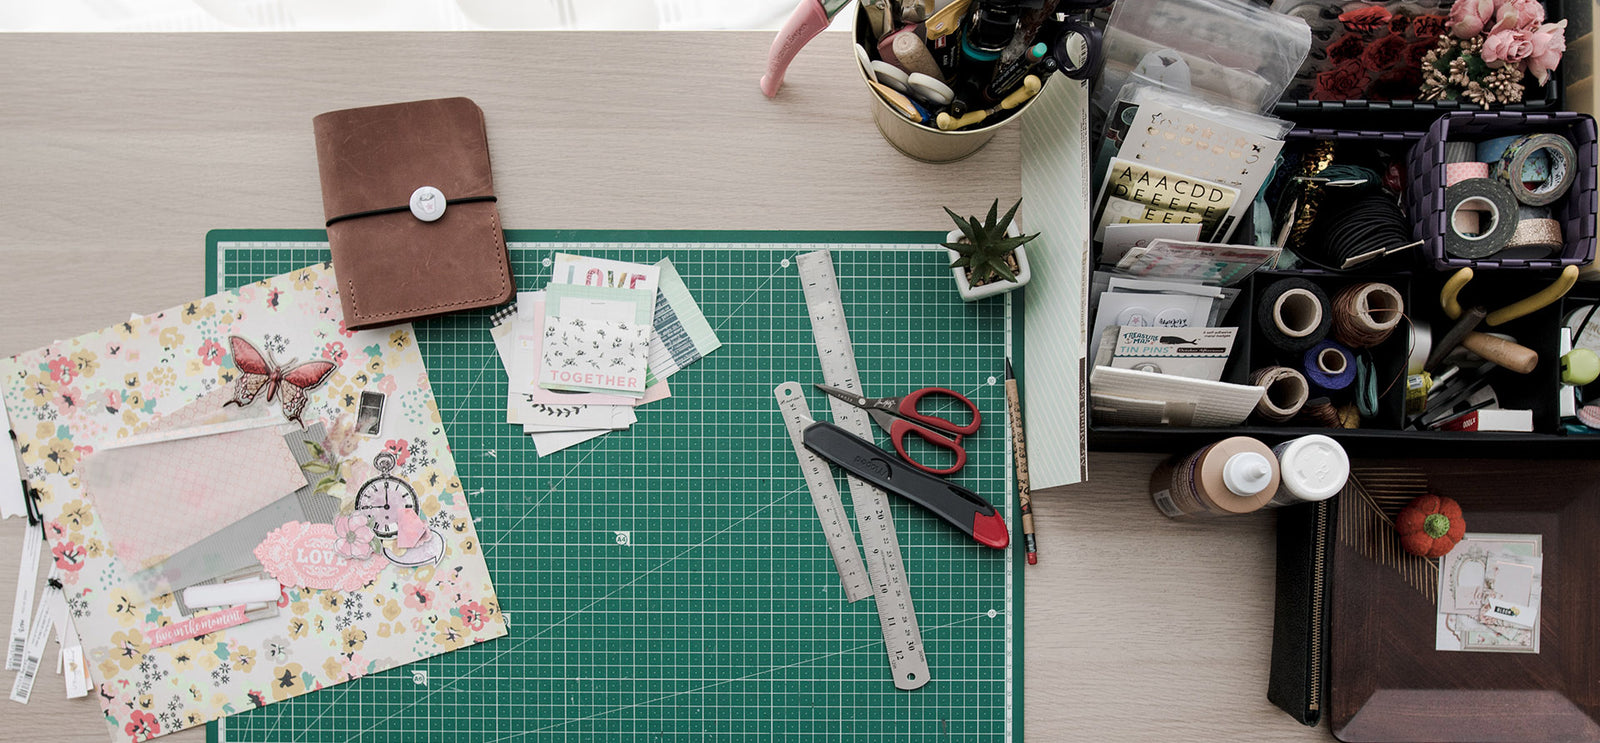 5 Cricut Hacks Every Crafter Should Know